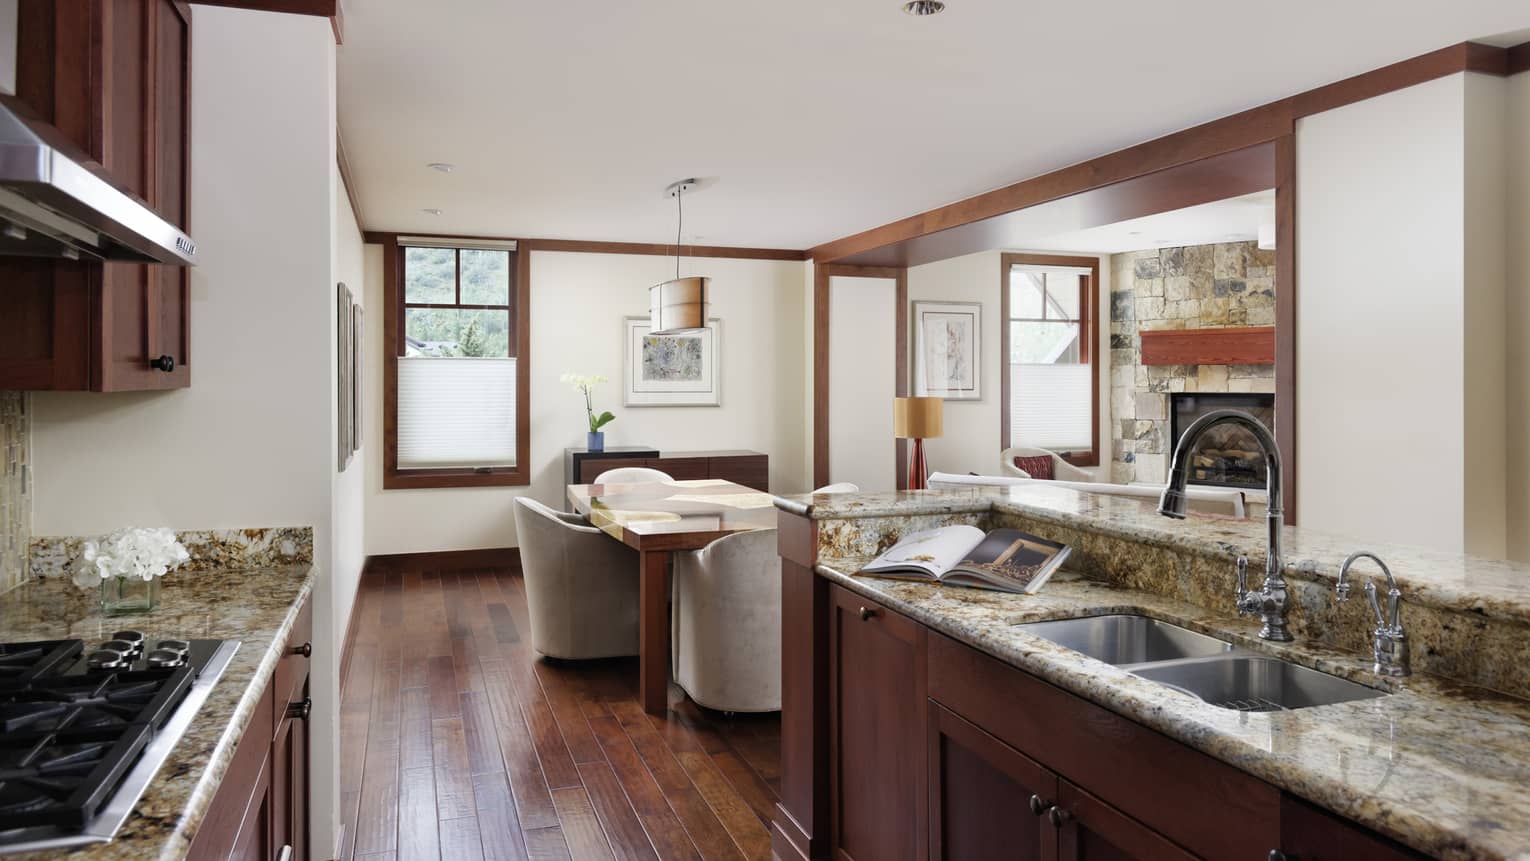 Kitchen opening to dining room, rich wooden floors, granite countertops